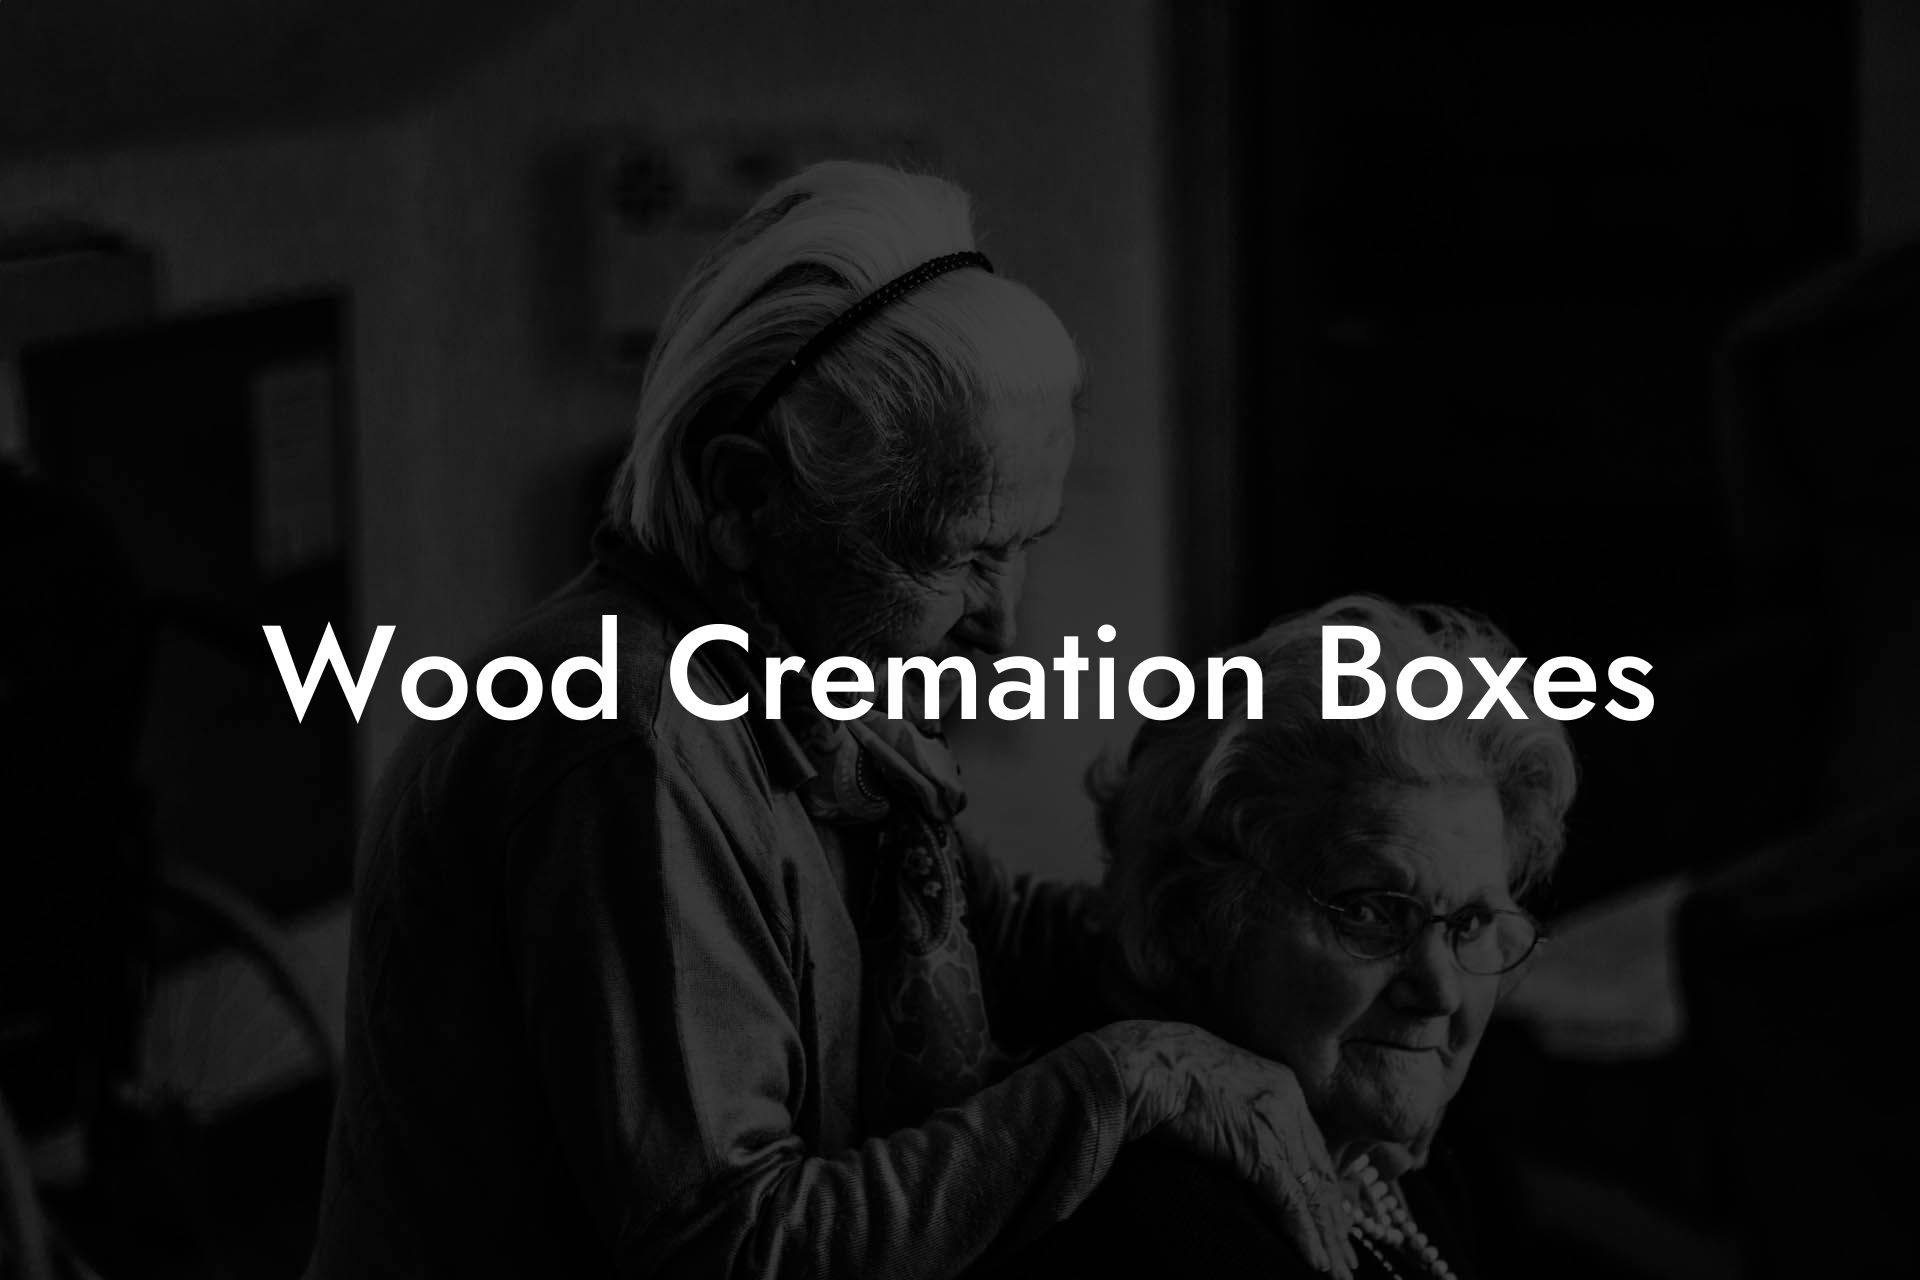 Wood Cremation Boxes